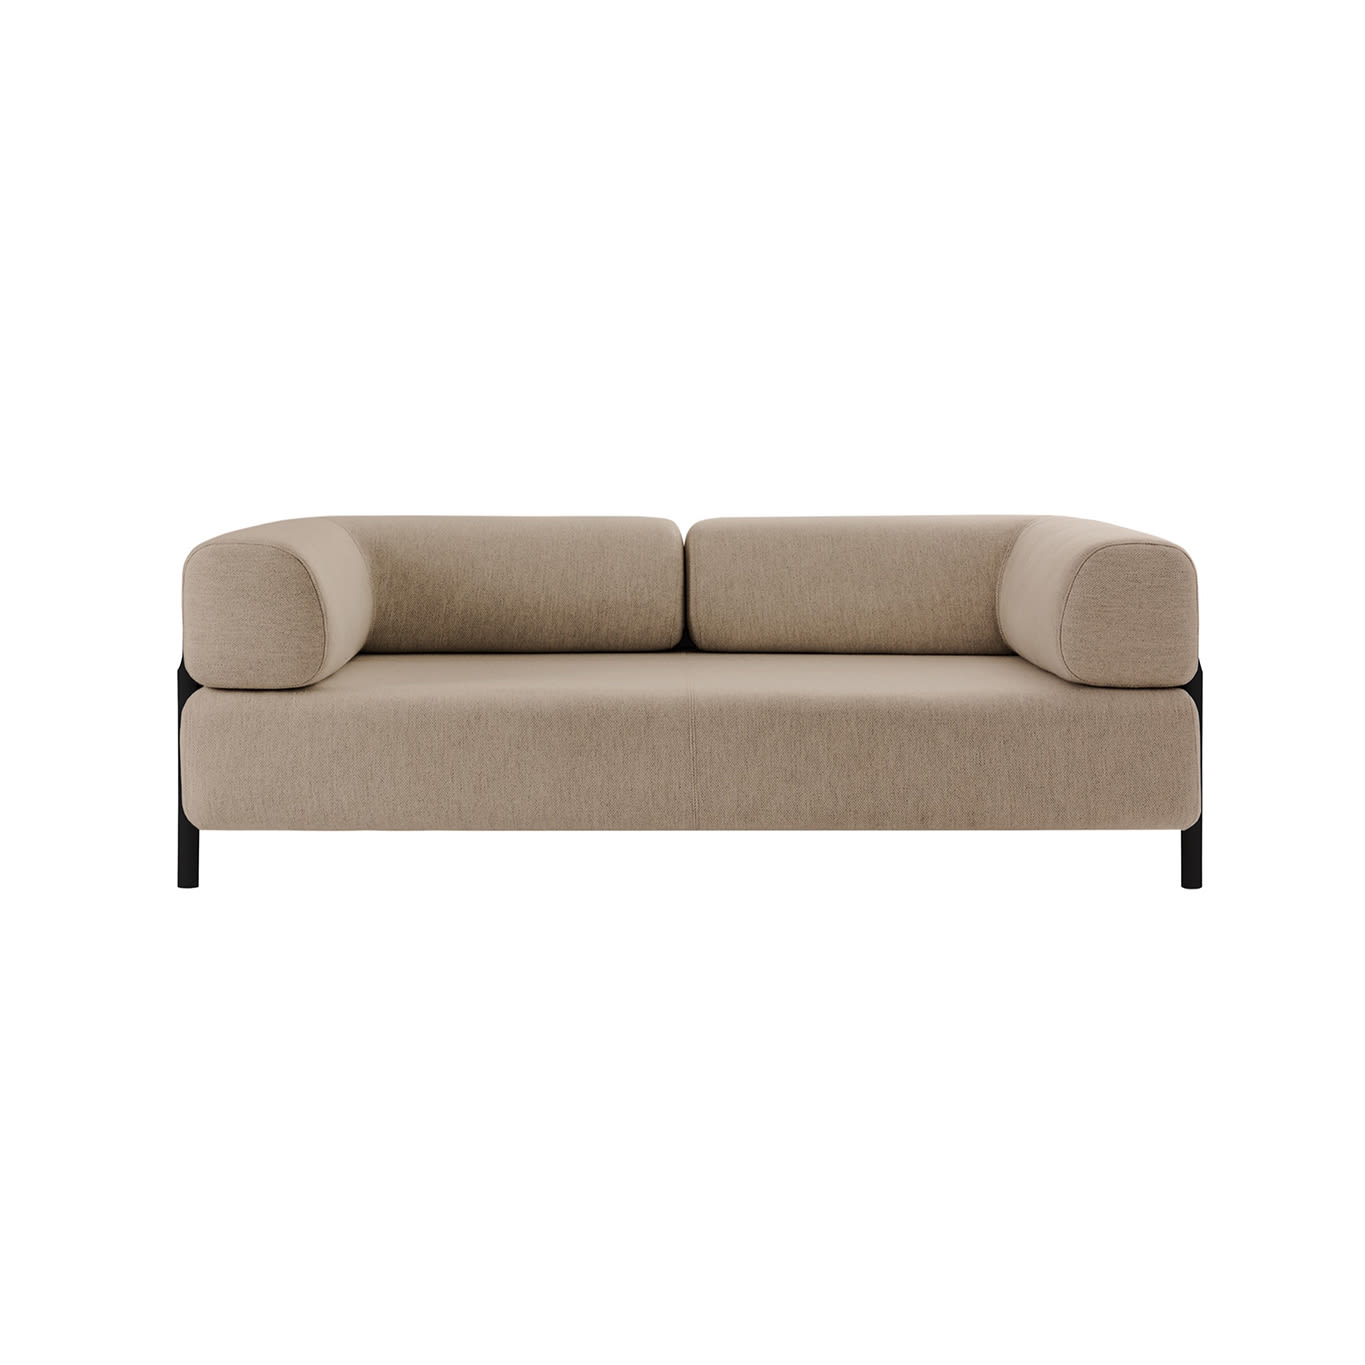 2-seater Sofa with Armrests, Beige